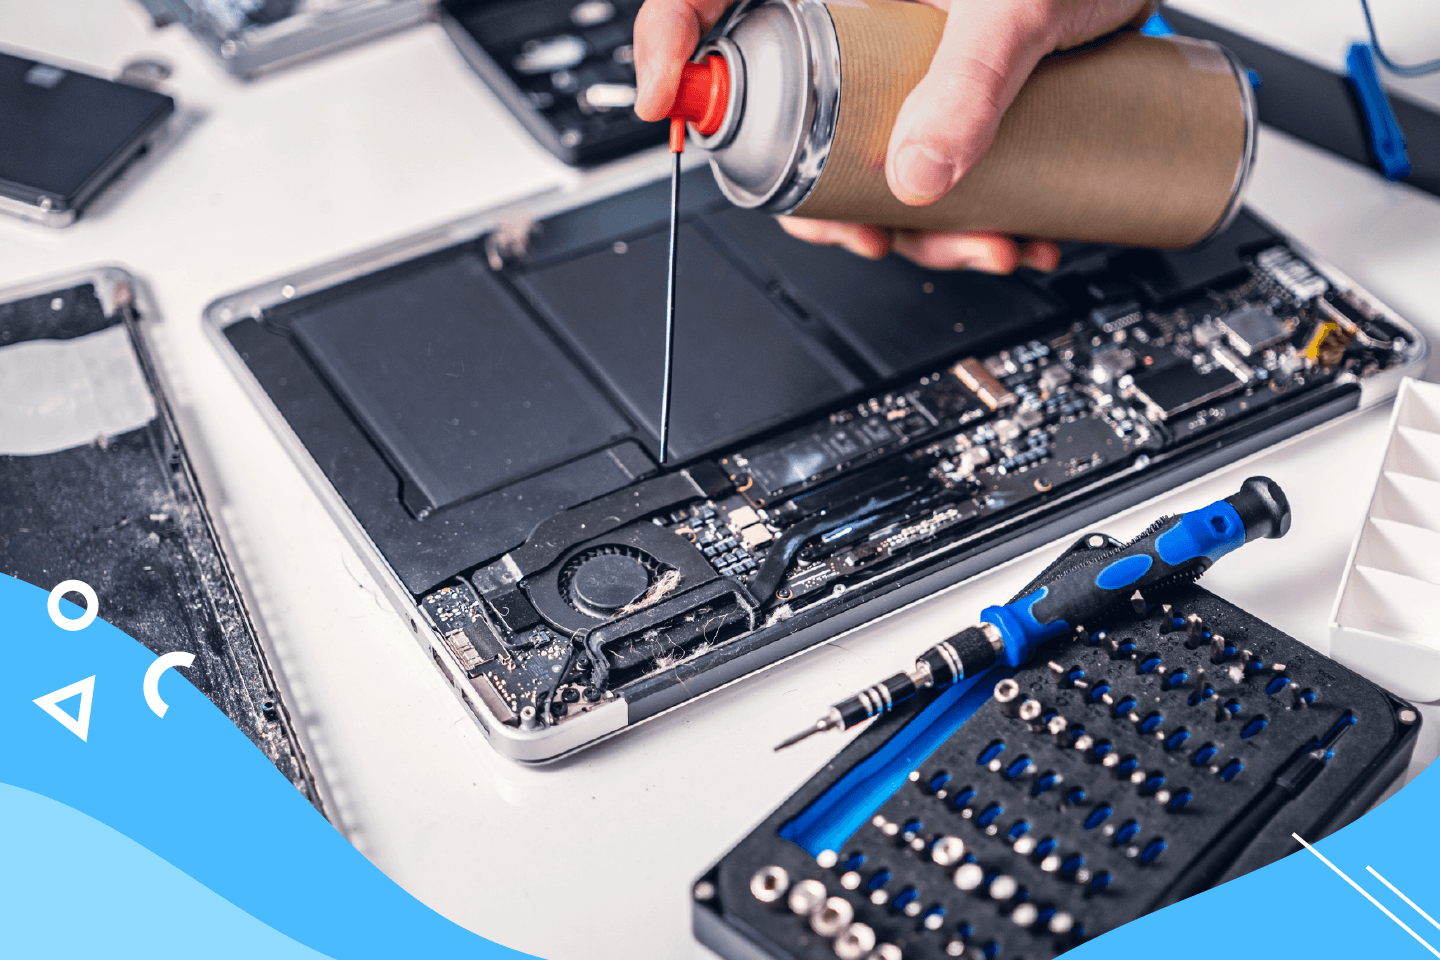 6 Reasons Why You Should Choose Apple-Certified Repair Services Over Everyone Else